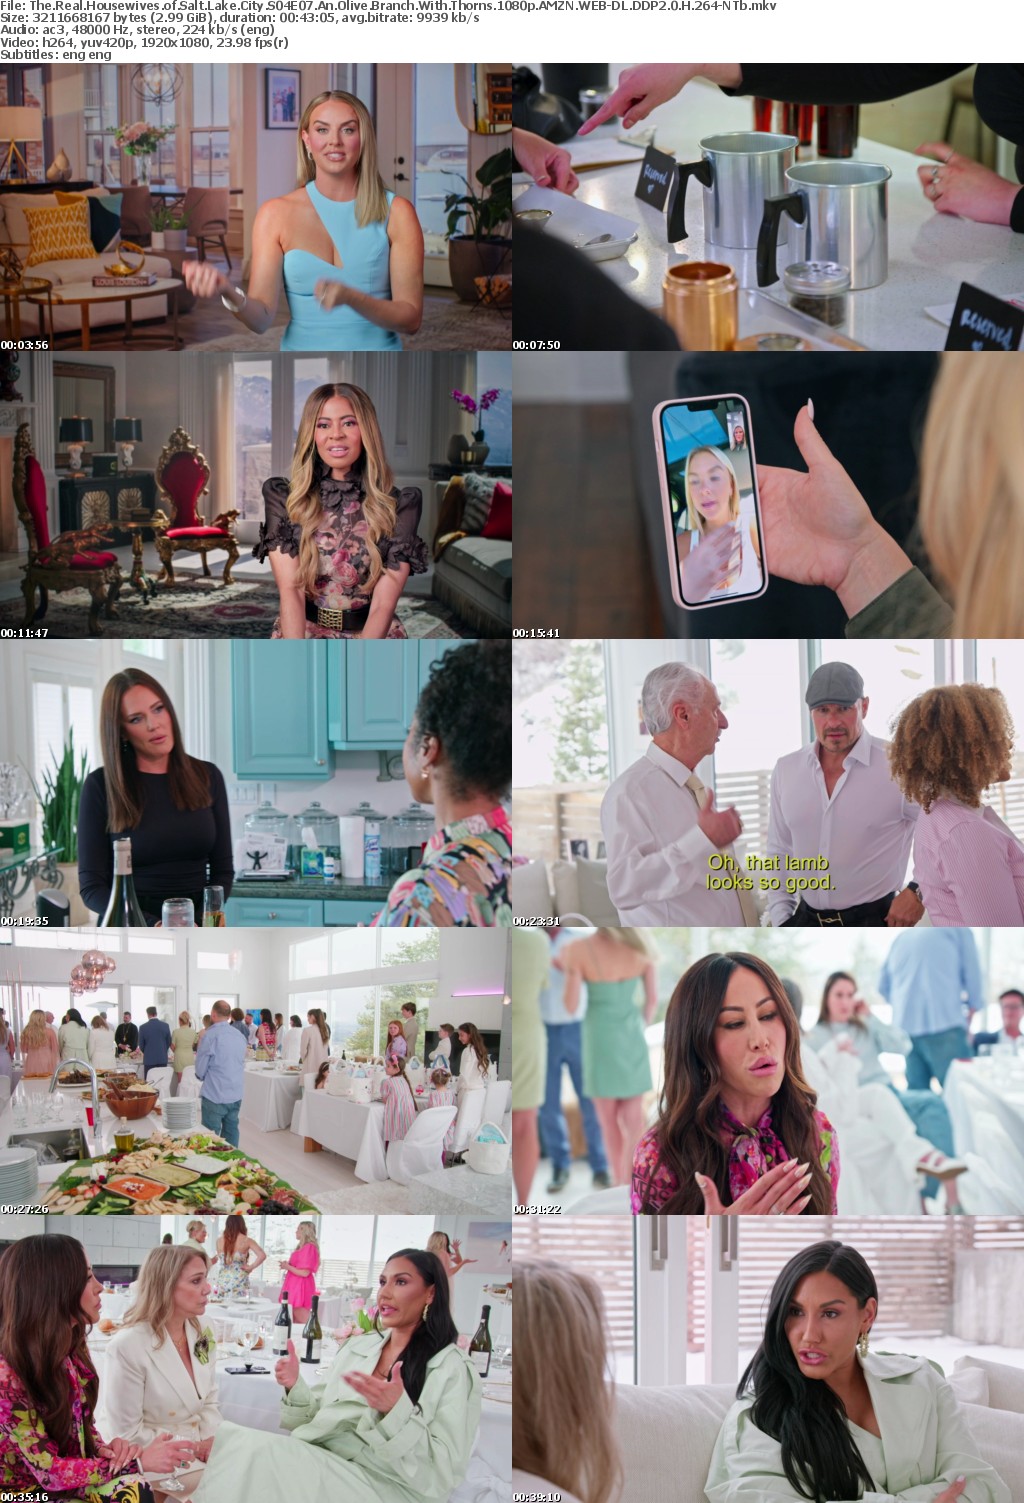 The Real Housewives of Salt Lake City S04E07 An Olive Branch With Thorns 1080p AMZN WEB-DL DDP2 0 H 264-NTb